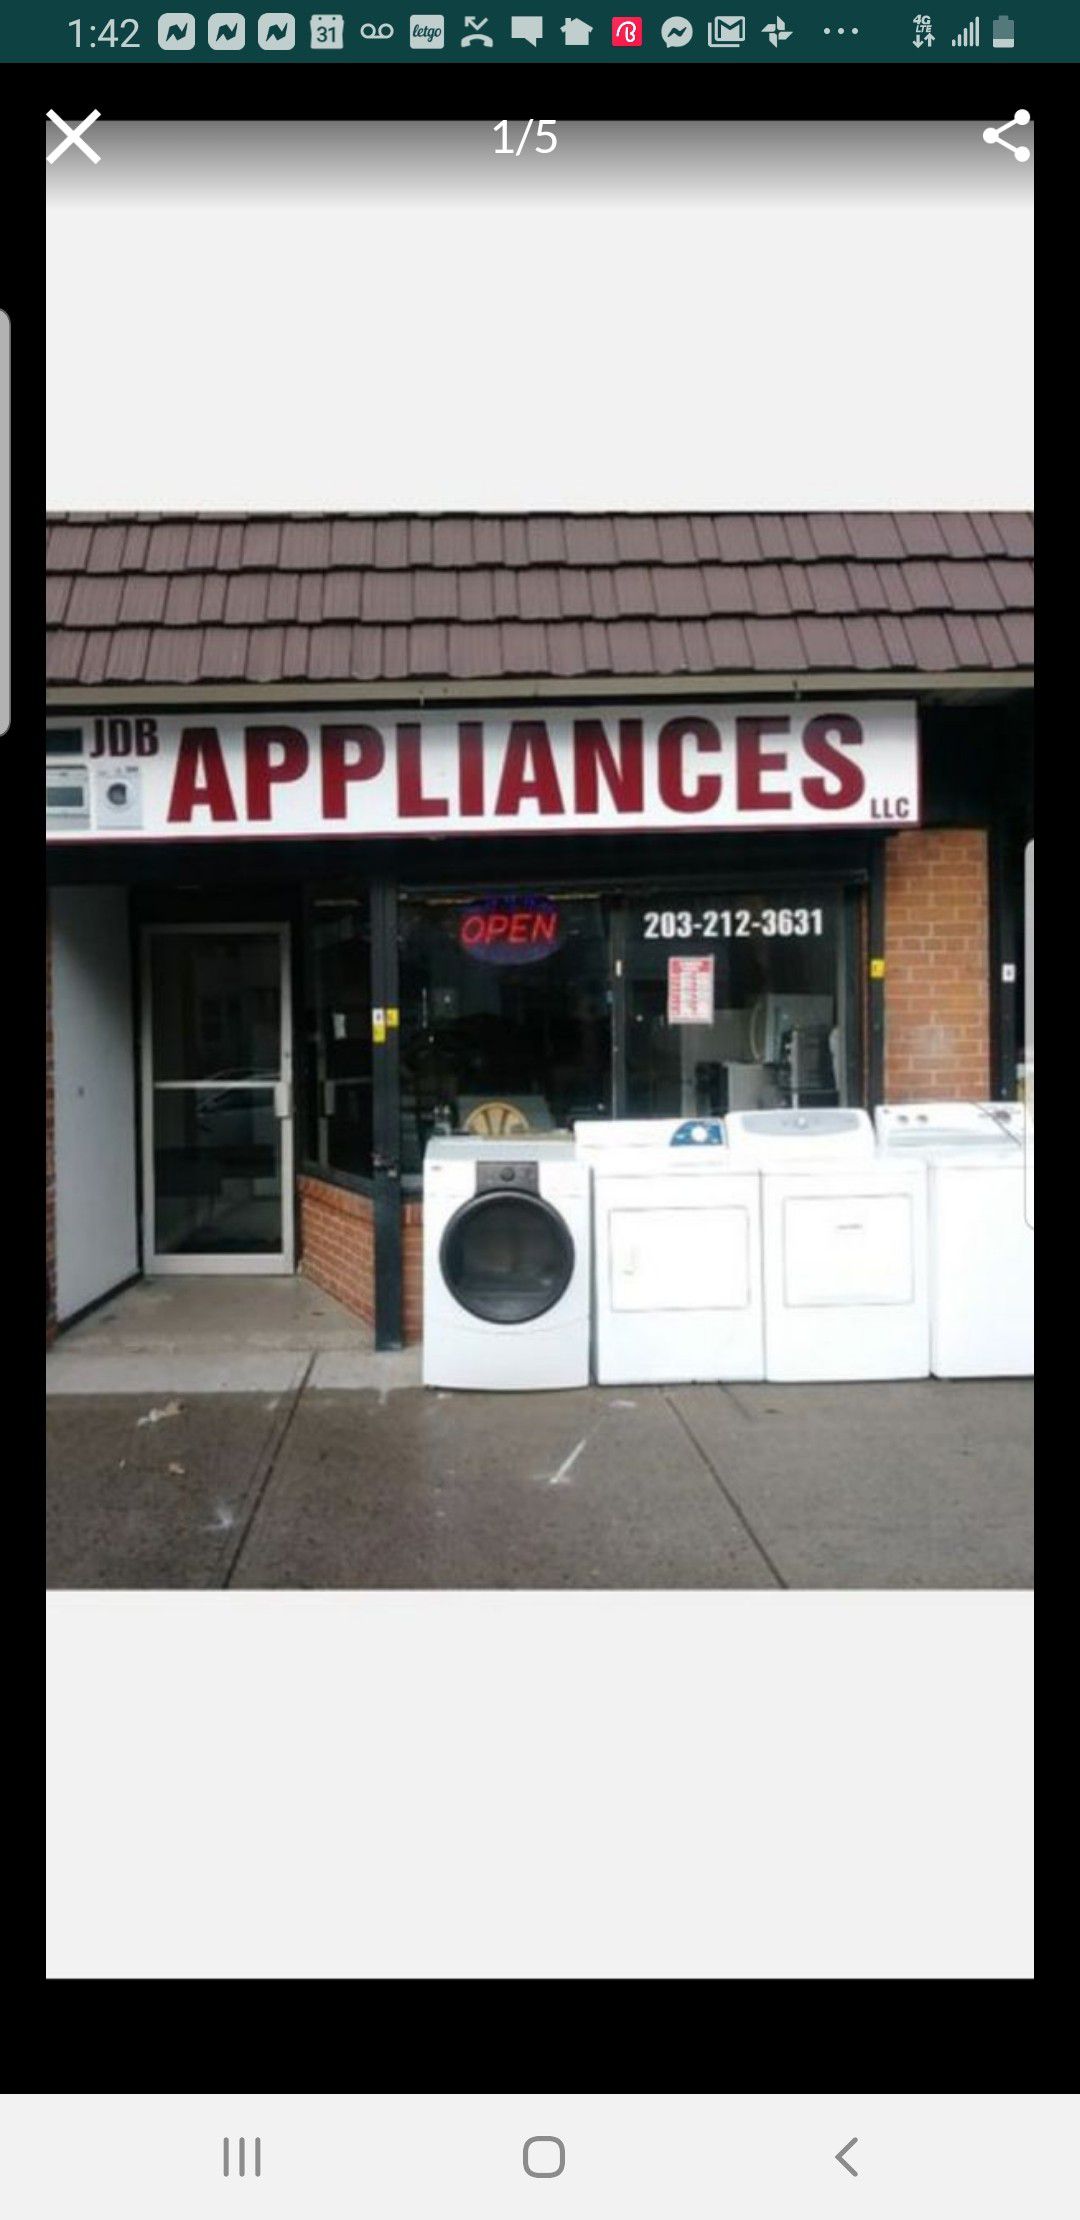 We, have new and used appliances,we have refrigerators,washers,dryers,freezers,microwave,dishwasher. We are located in Bridgeport ct